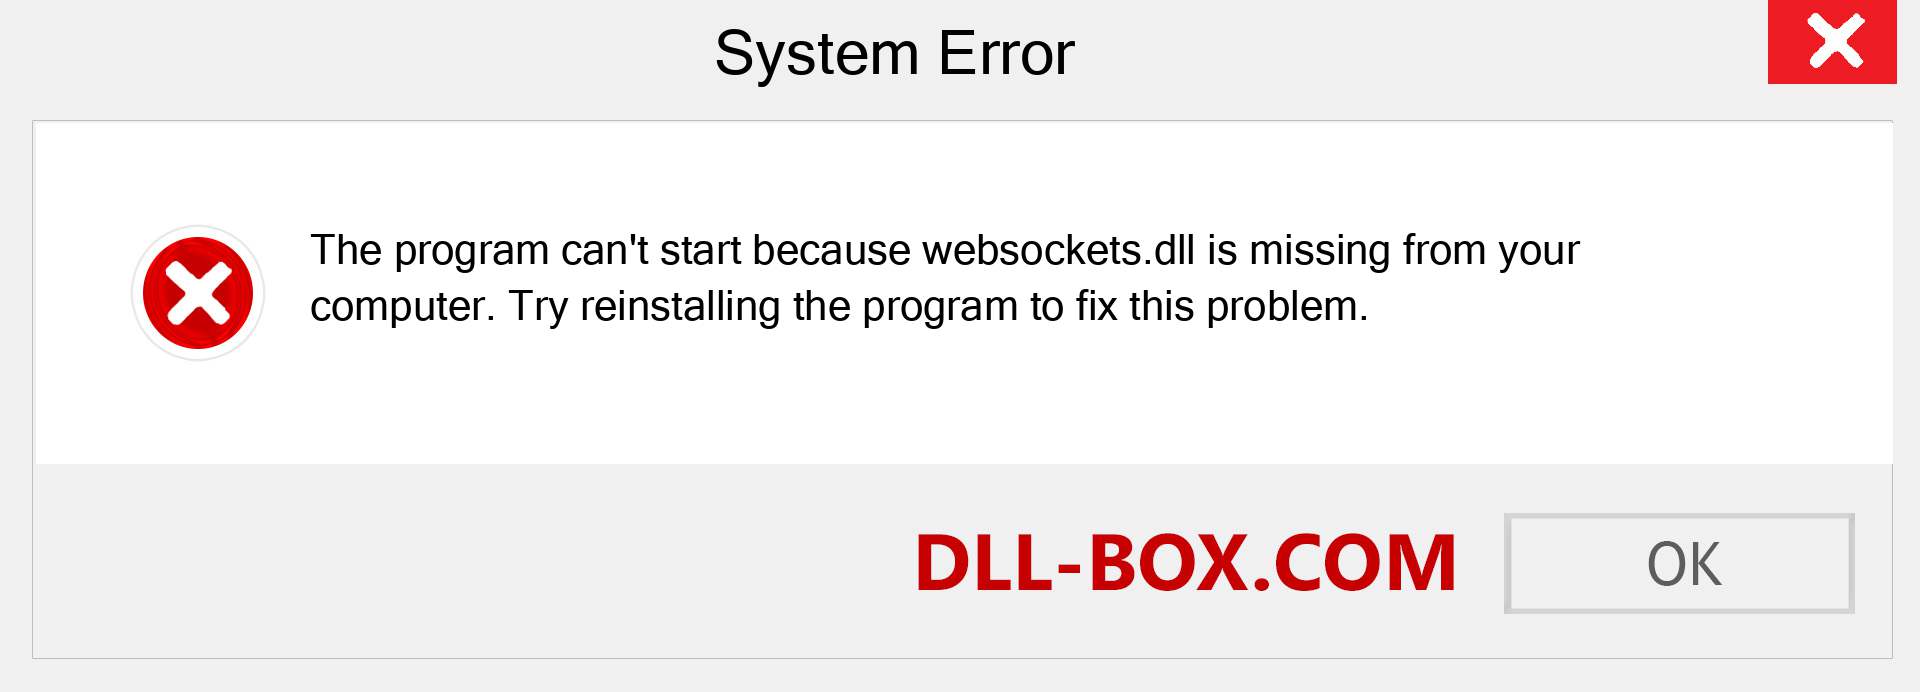  websockets.dll file is missing?. Download for Windows 7, 8, 10 - Fix  websockets dll Missing Error on Windows, photos, images